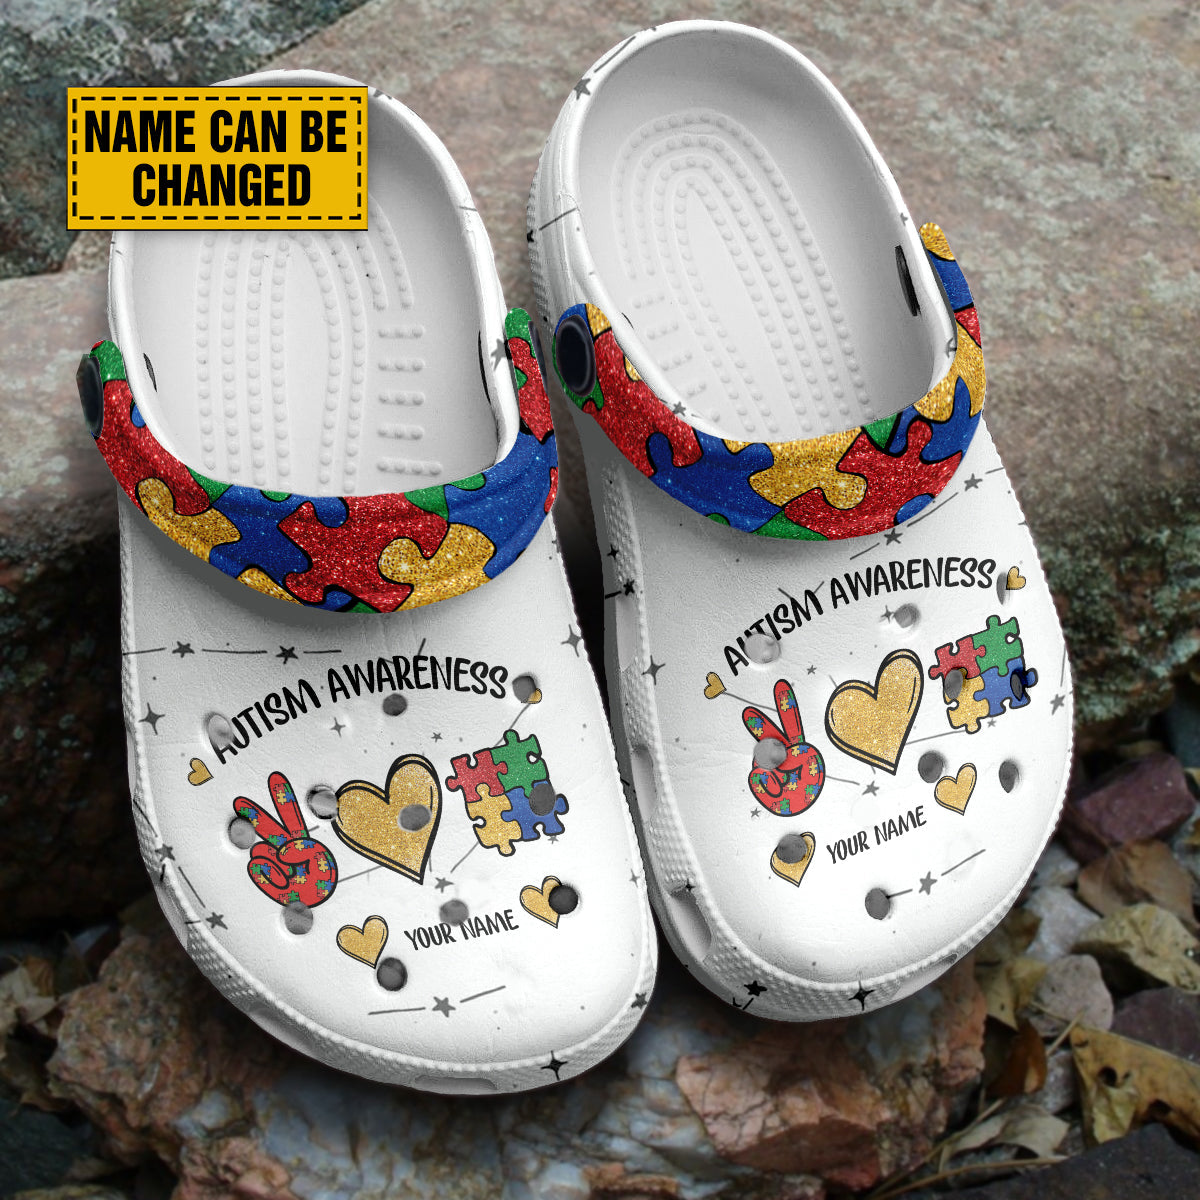 Teesdily | Autism Awareness, Peace Love Autism, Autism Awareness Clogs, Autism Puzzle Piece Clogs, Autism Mom Gift, Clogs For Him Her, Autistic Gifts, Kid & Adult Unisex Clogs Shoes Eva